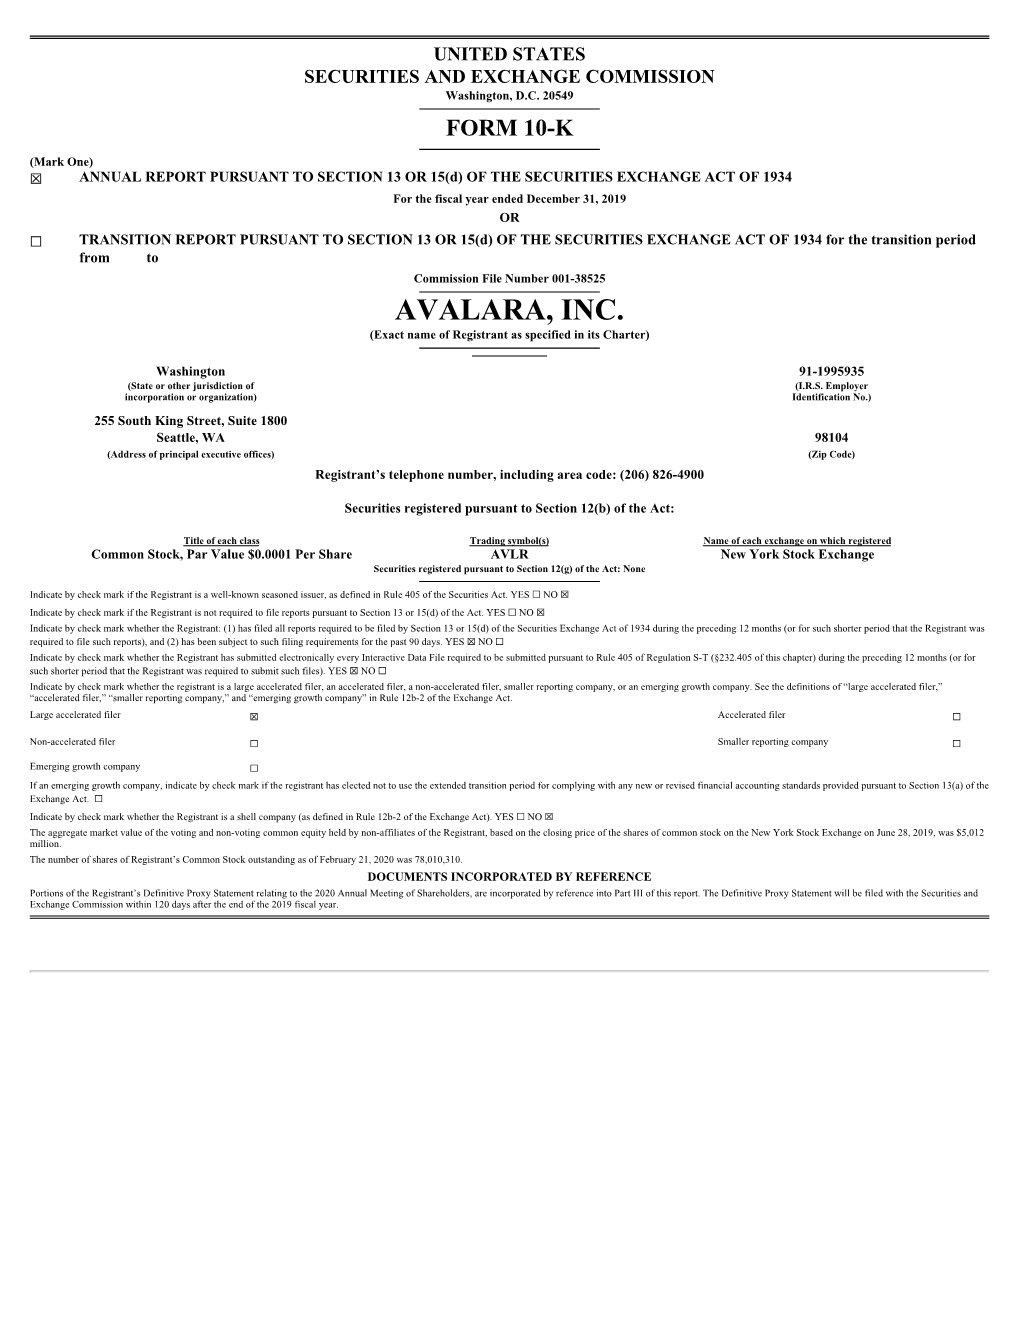 AVALARA, INC. (Exact Name of Registrant As Specified in Its Charter)